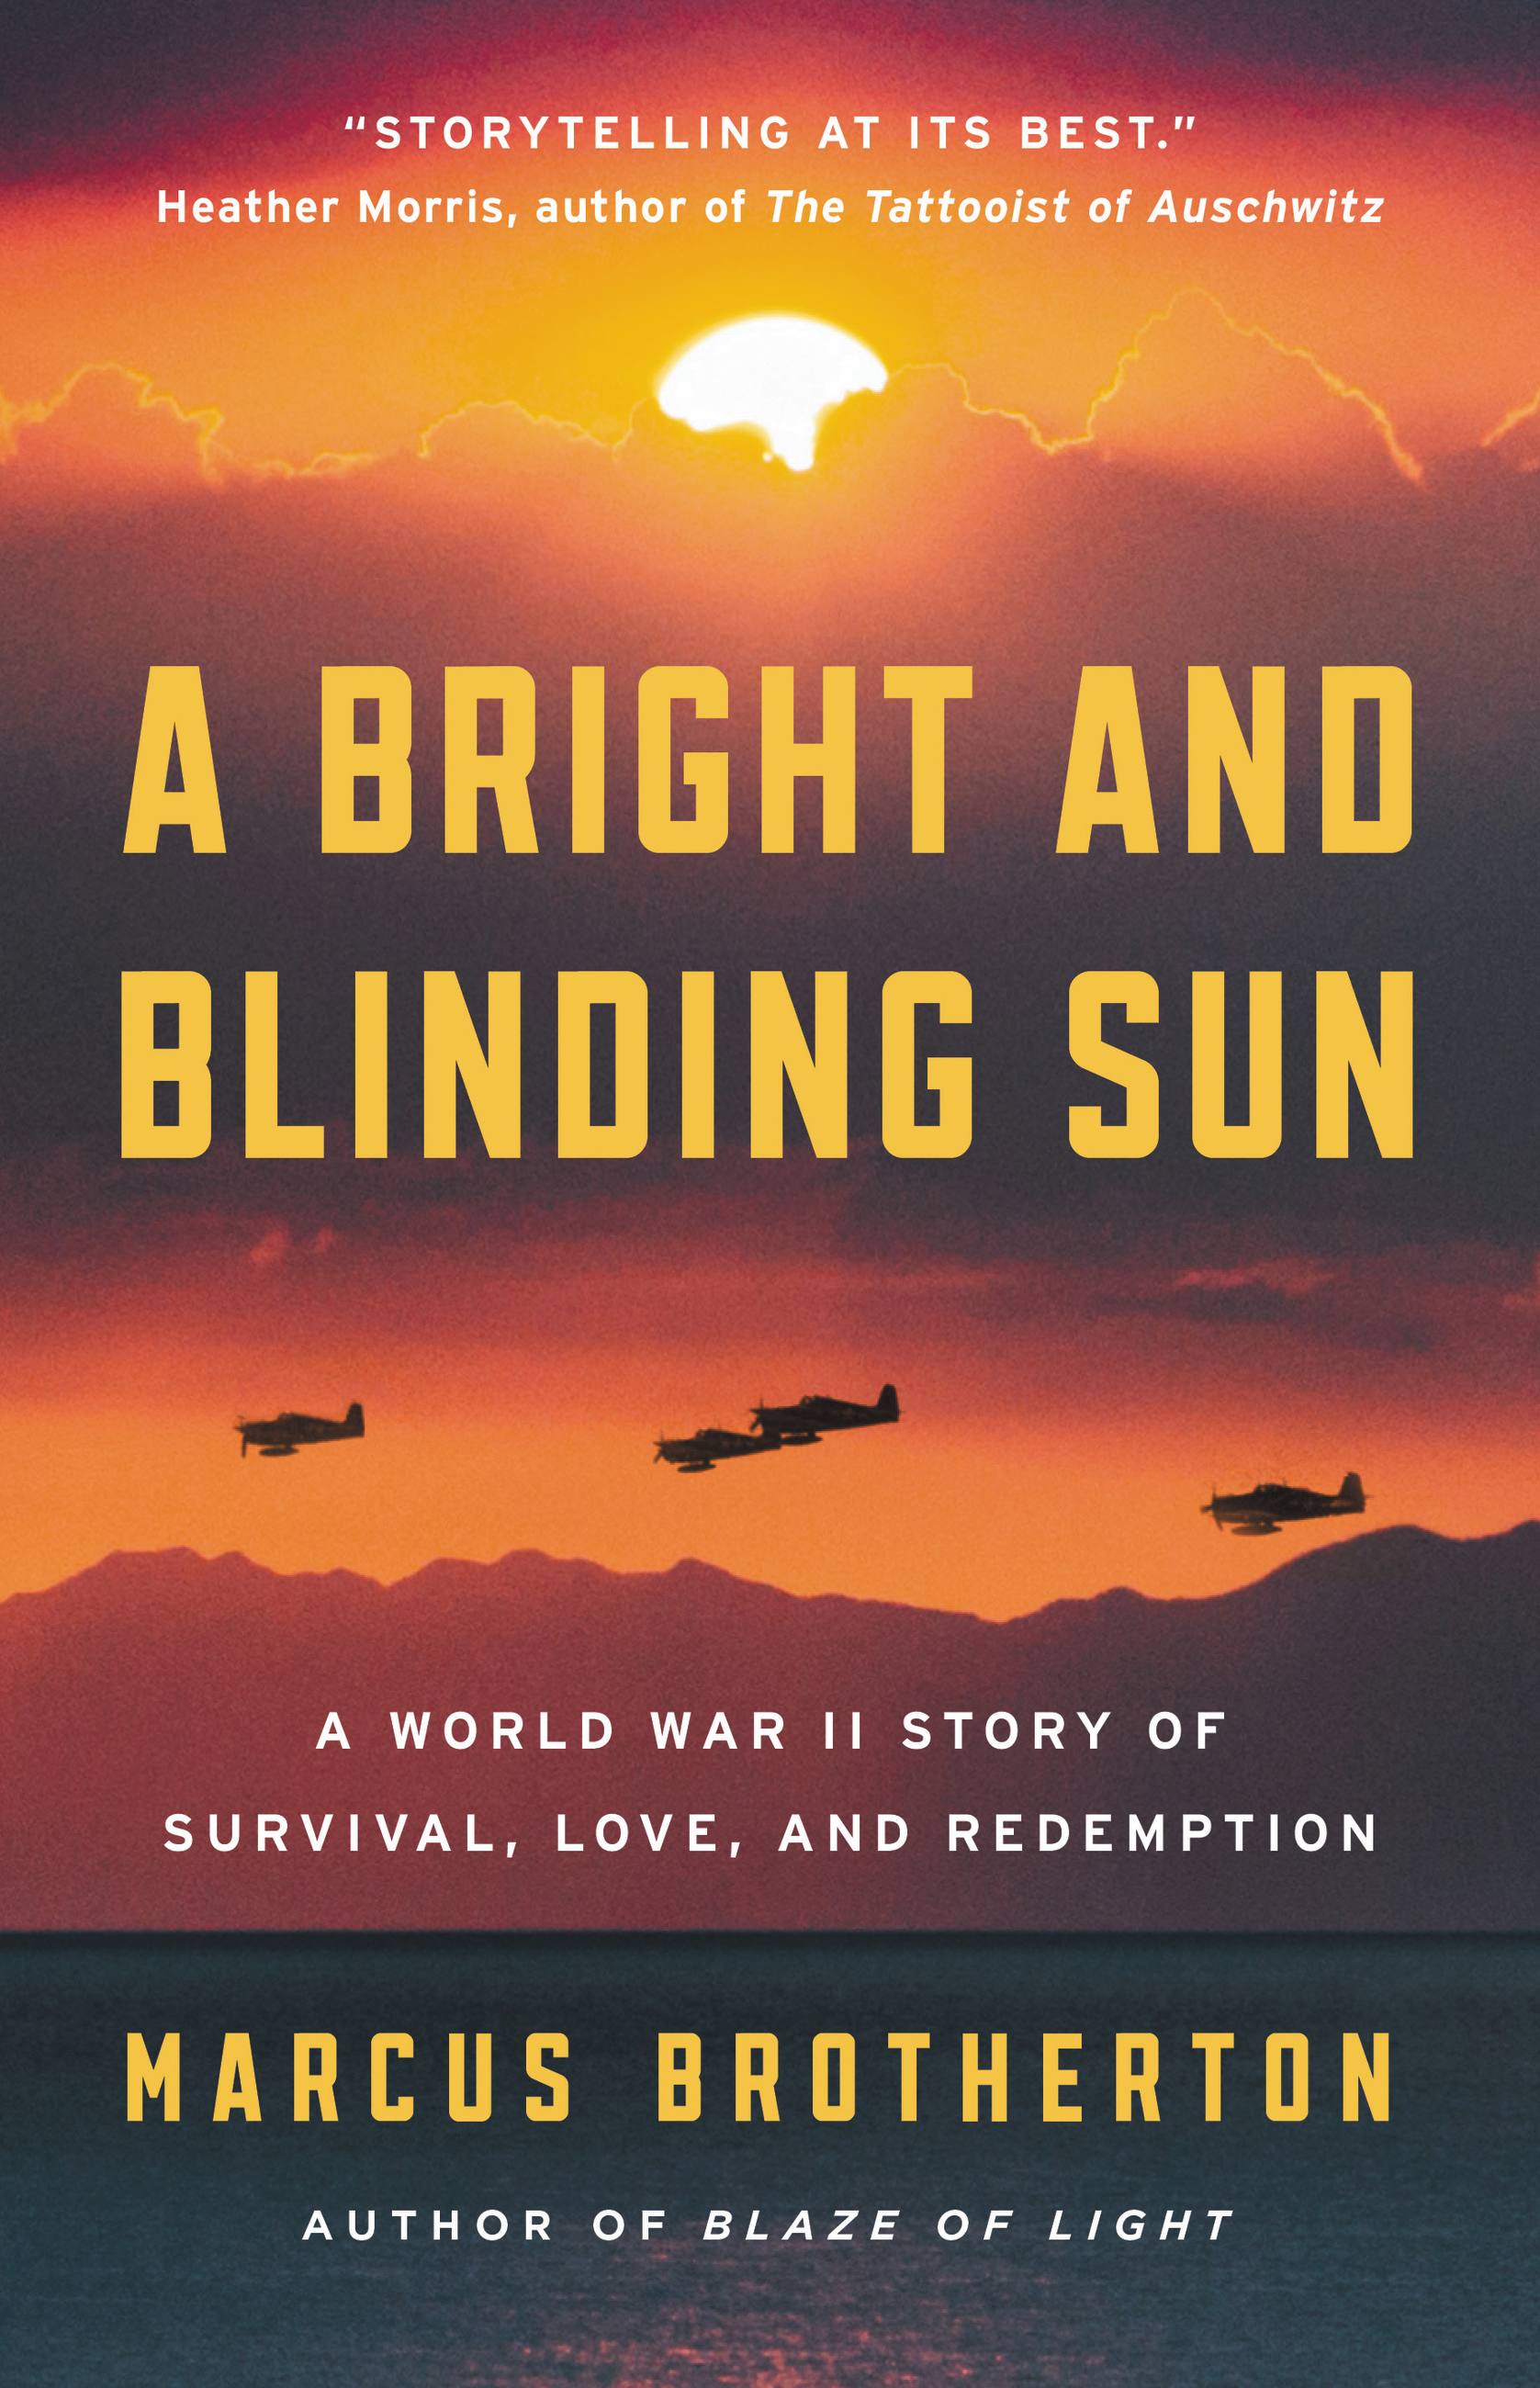 Blinding　by　Sun　Book　Marcus　A　Group　Brotherton　Bright　and　Hachette